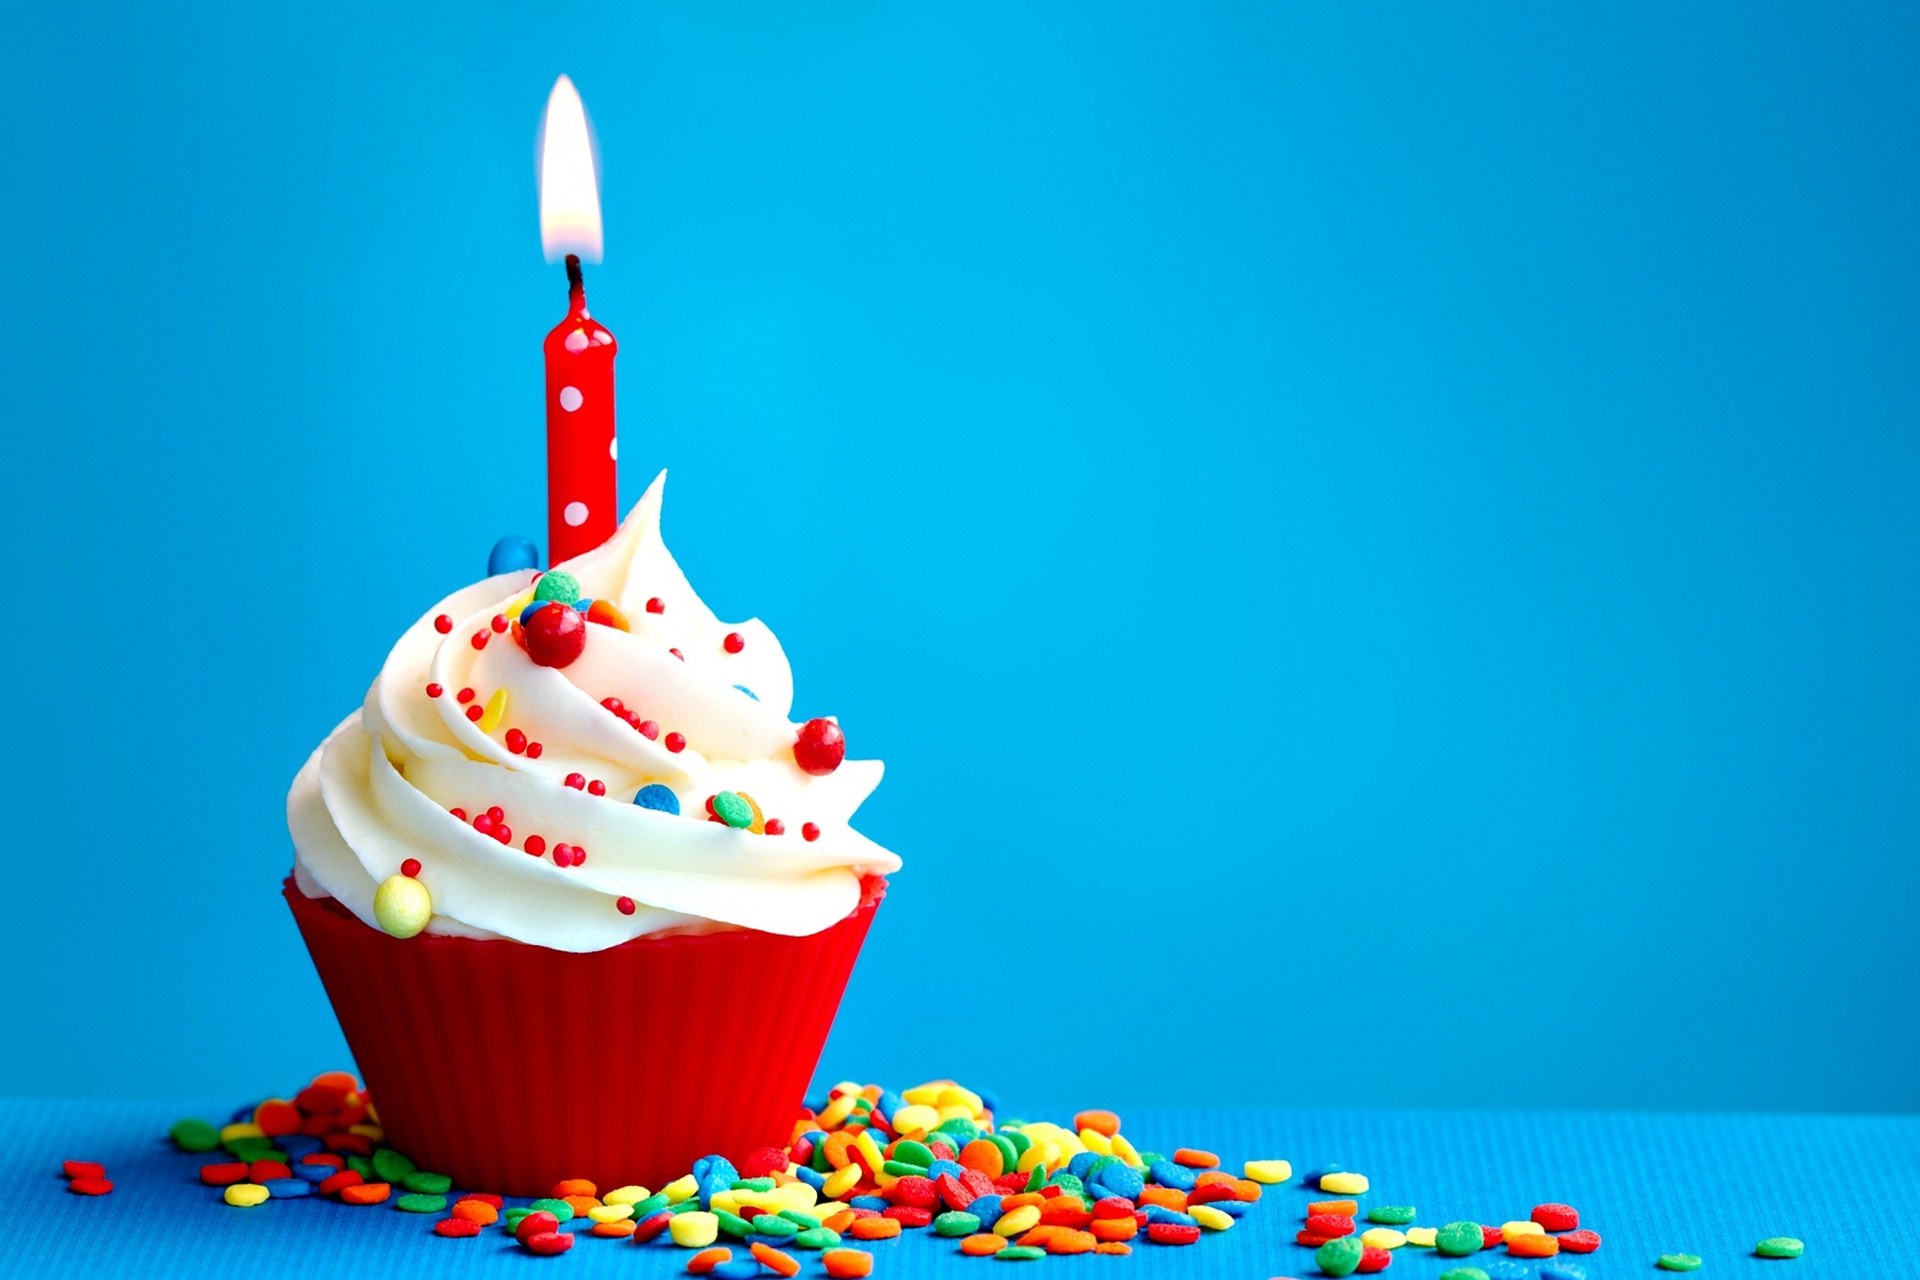 Happy Birthday Cup Cake Wallpaper   HD Wallpapers